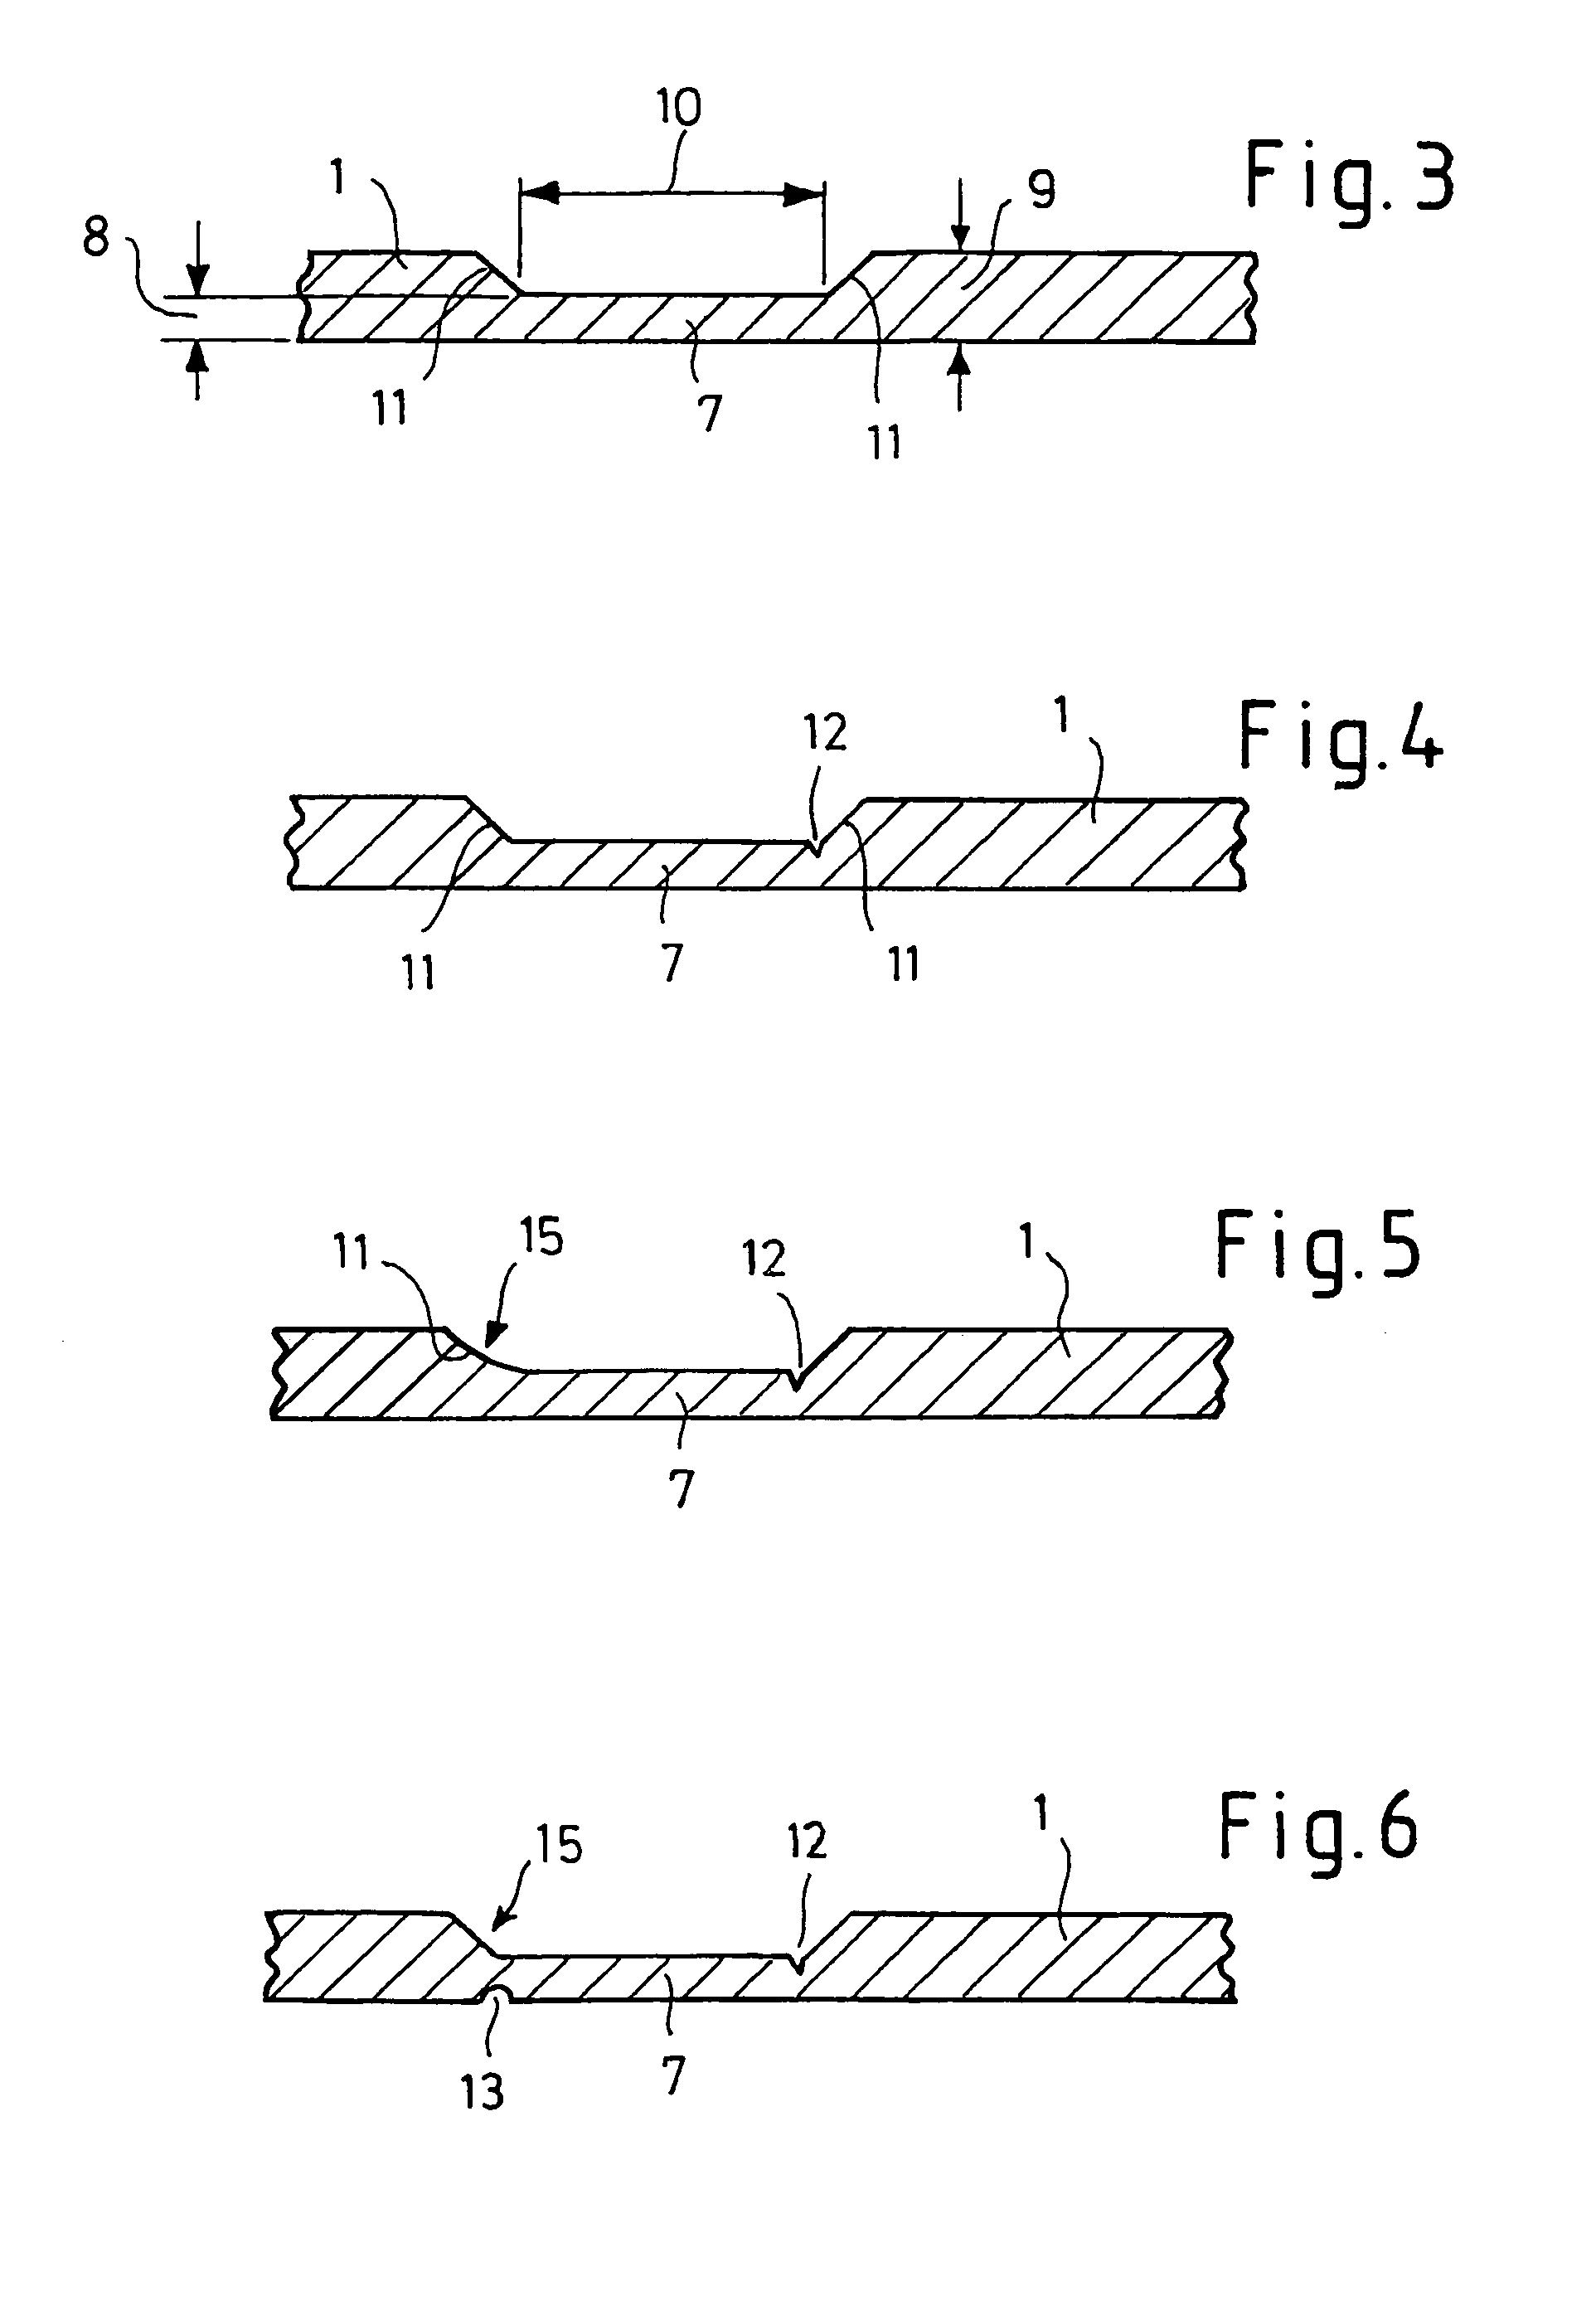 Pyromechanical separating device with a specially shaped current conductor rail